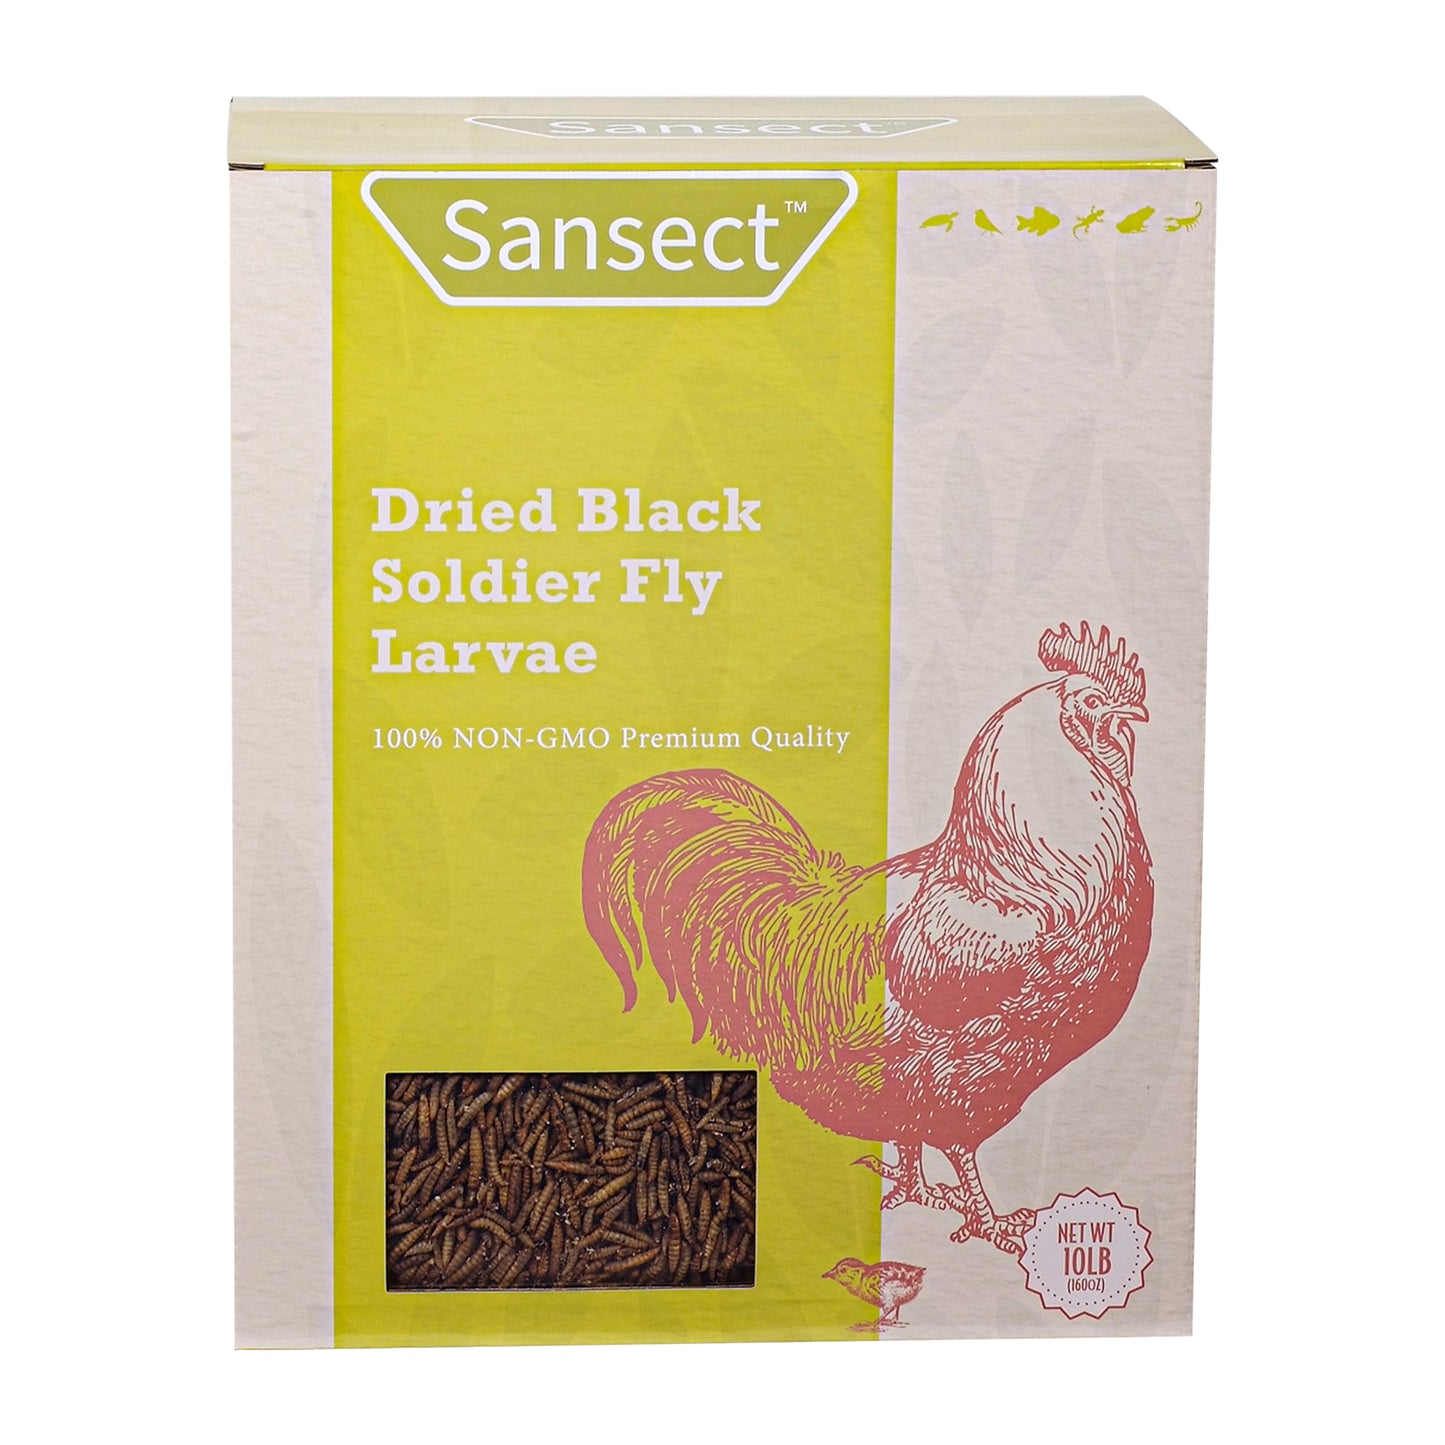 Sansect 10LB High Calcium Dried Black Soldier Fly Larvae for Chickens, Birds, Reptiles